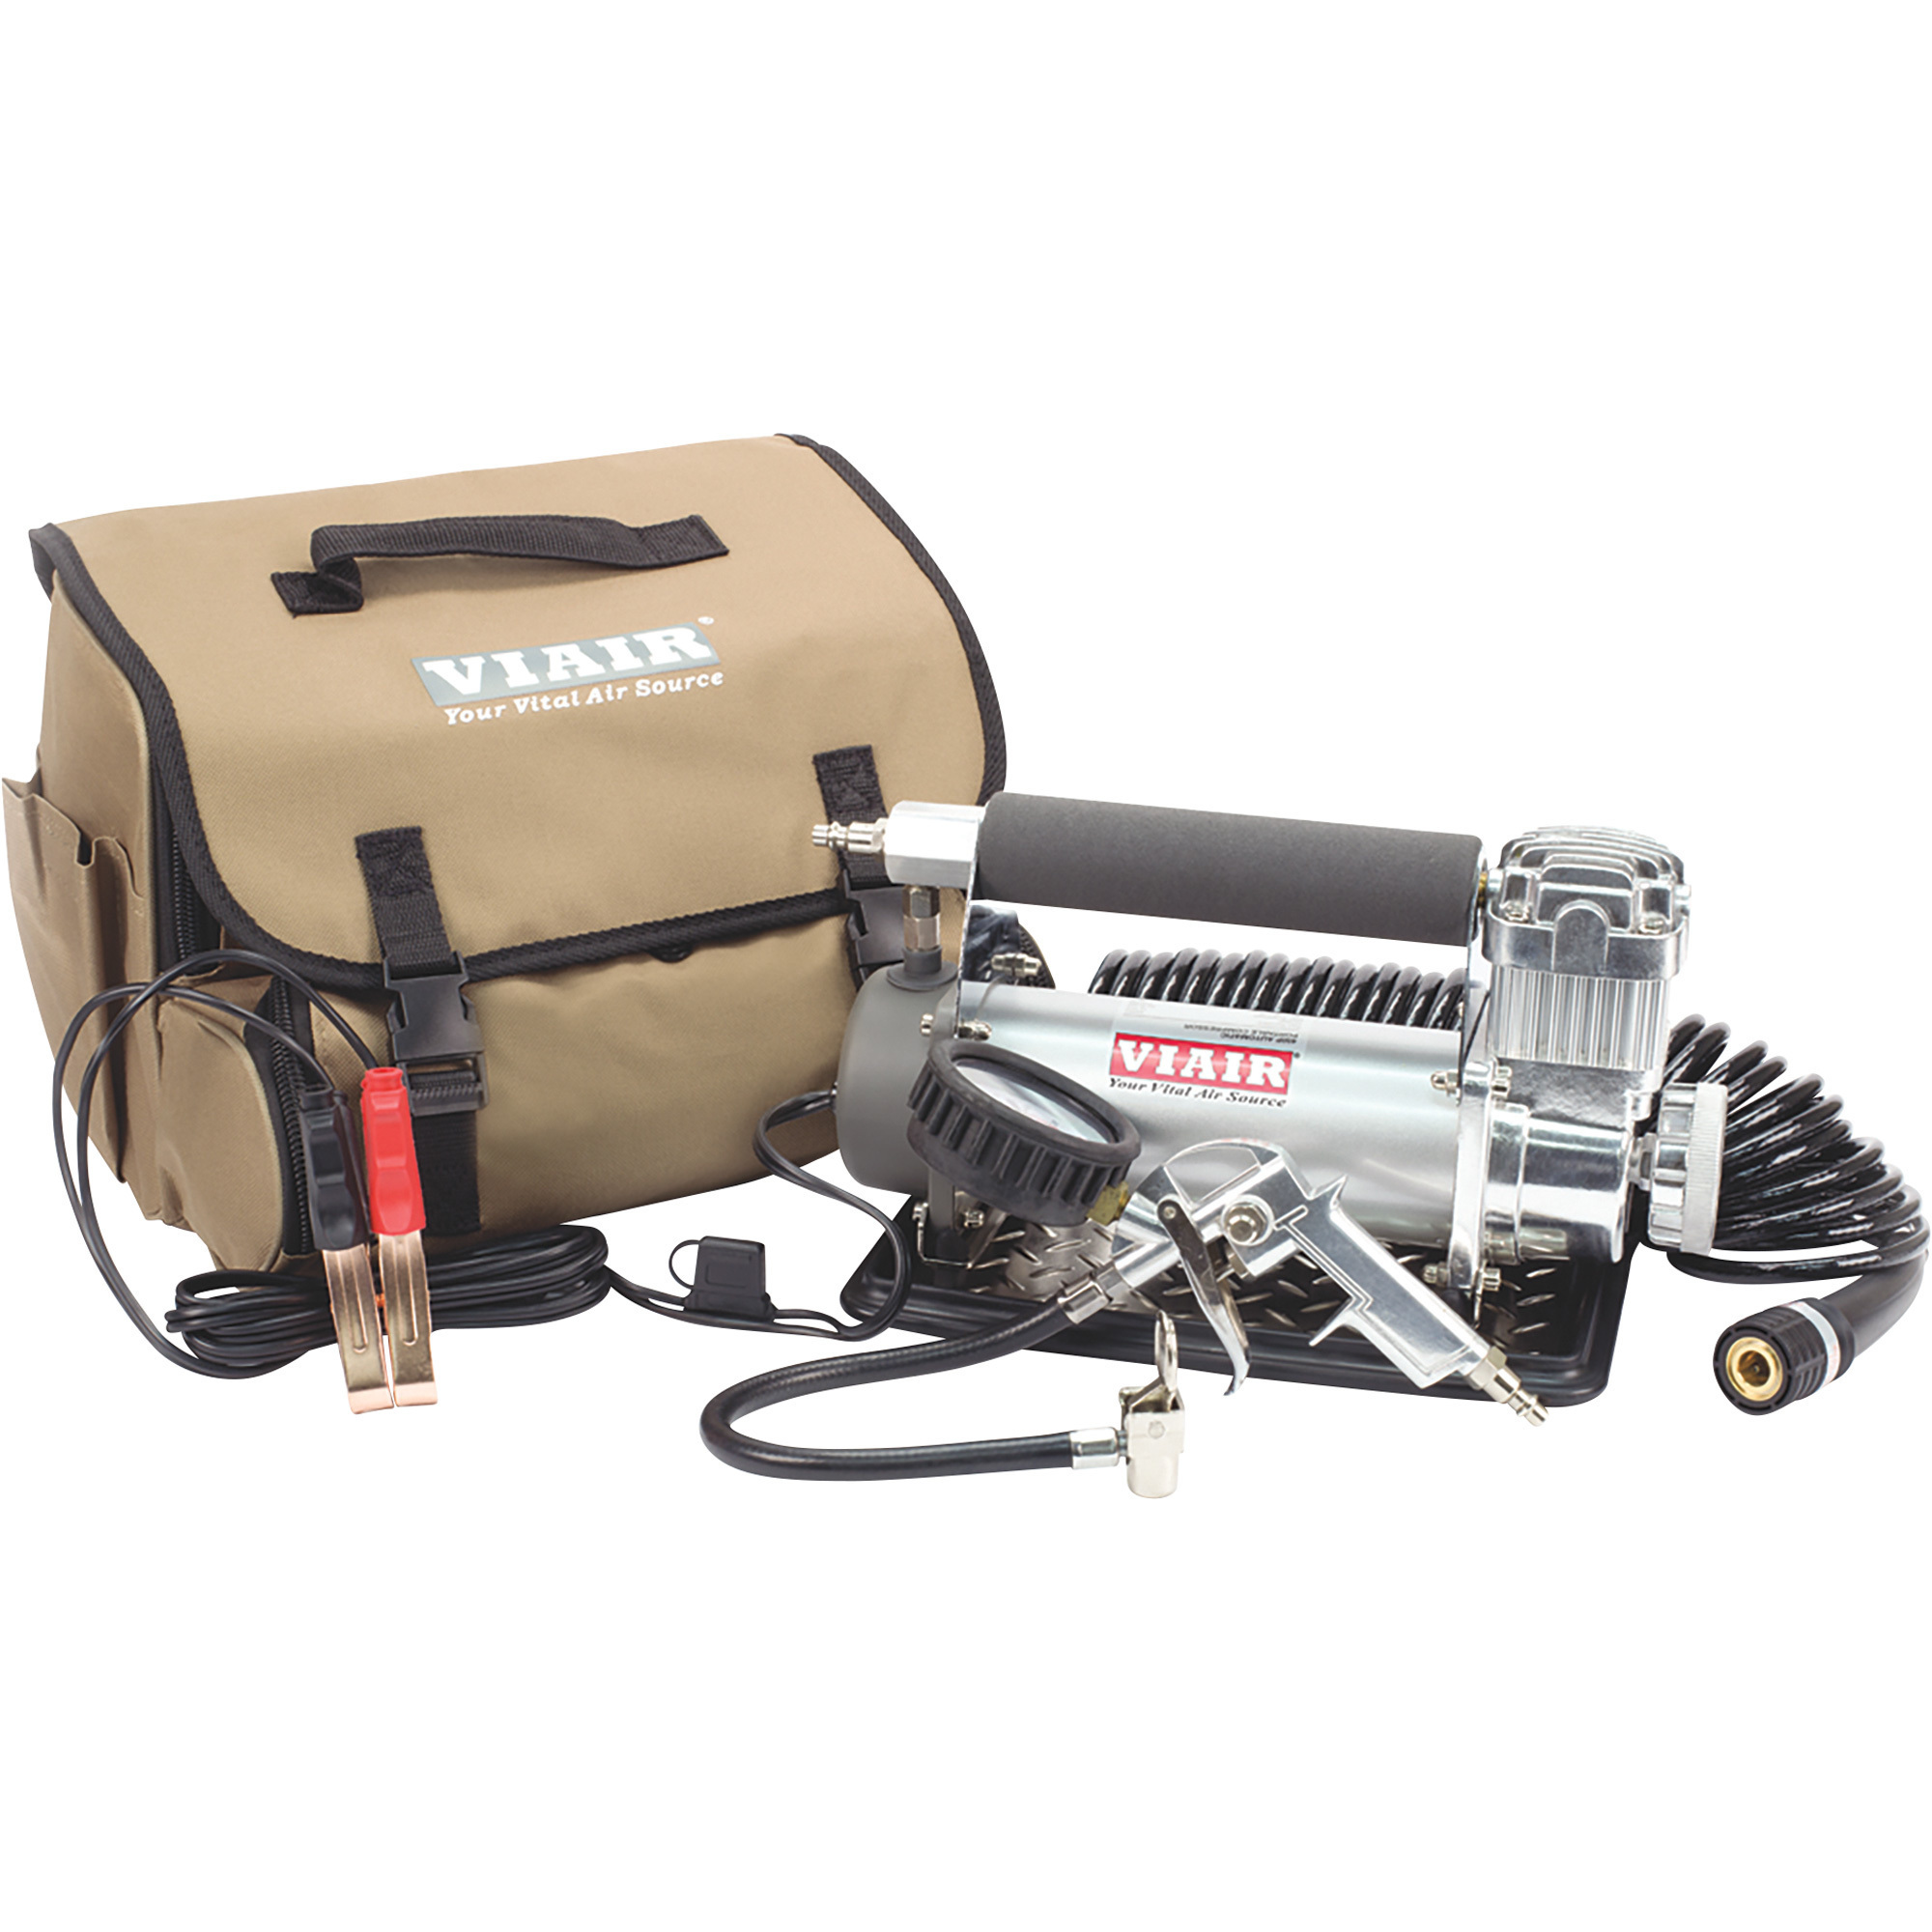 Visland 150 PSI Tire inflator portable air compressor with LCD